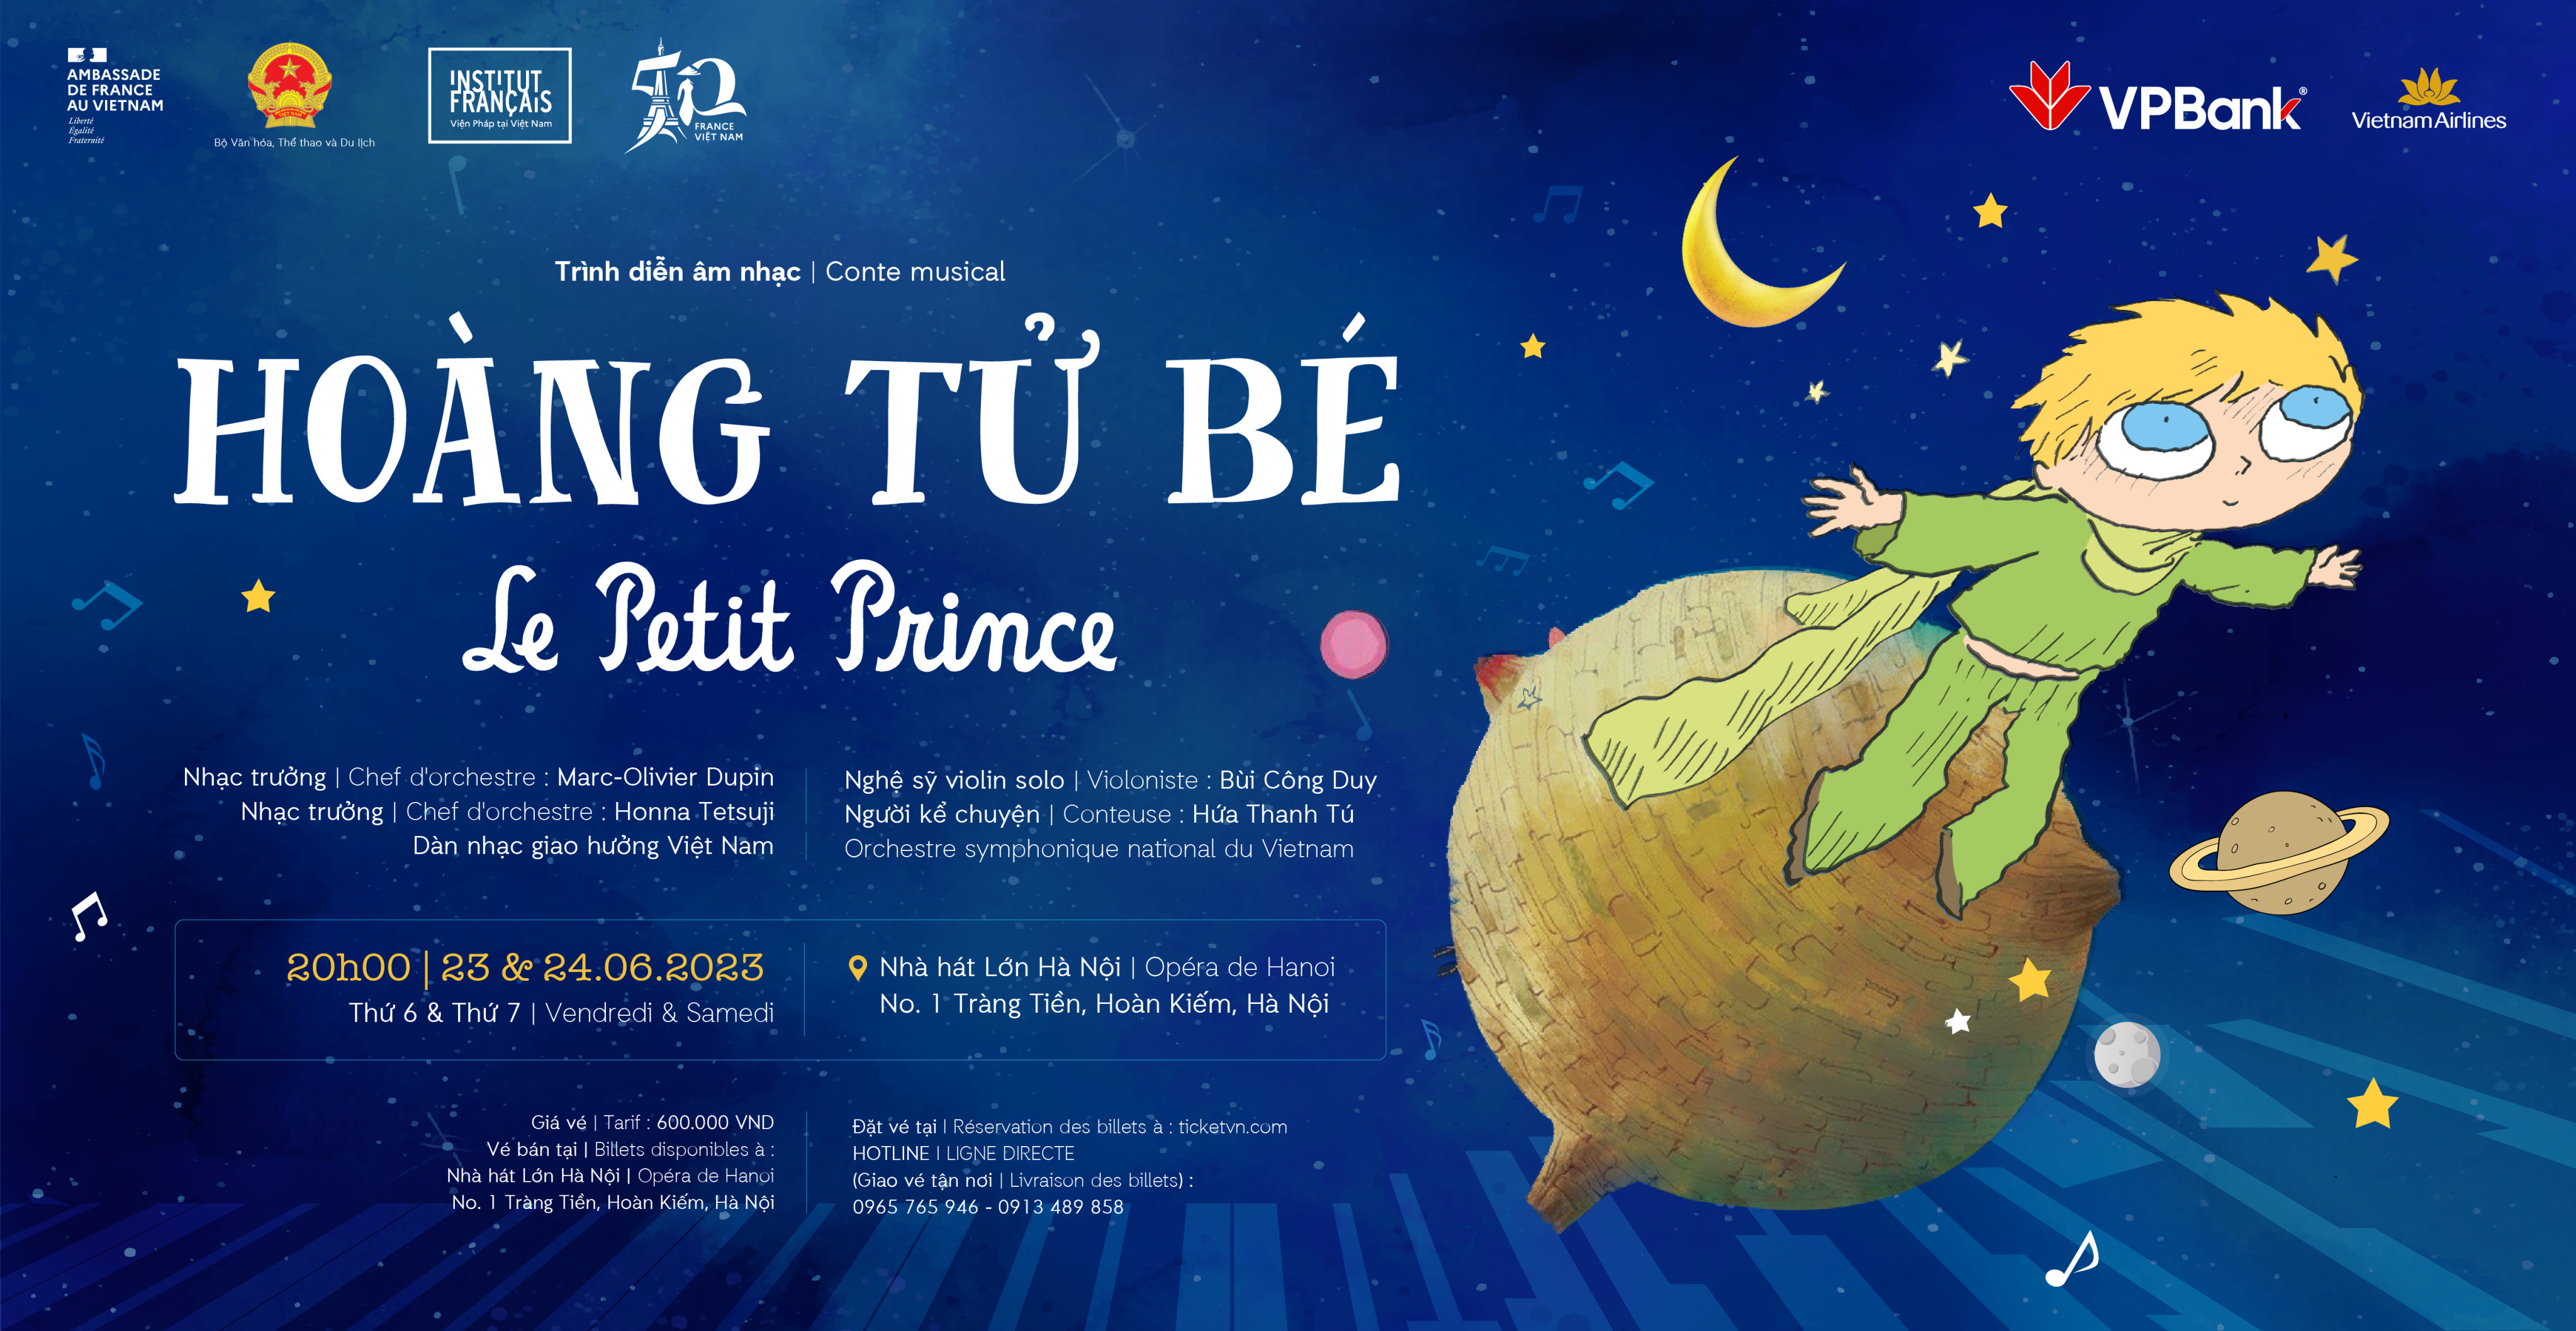 Spectacle Musical “Le Petit Prince”